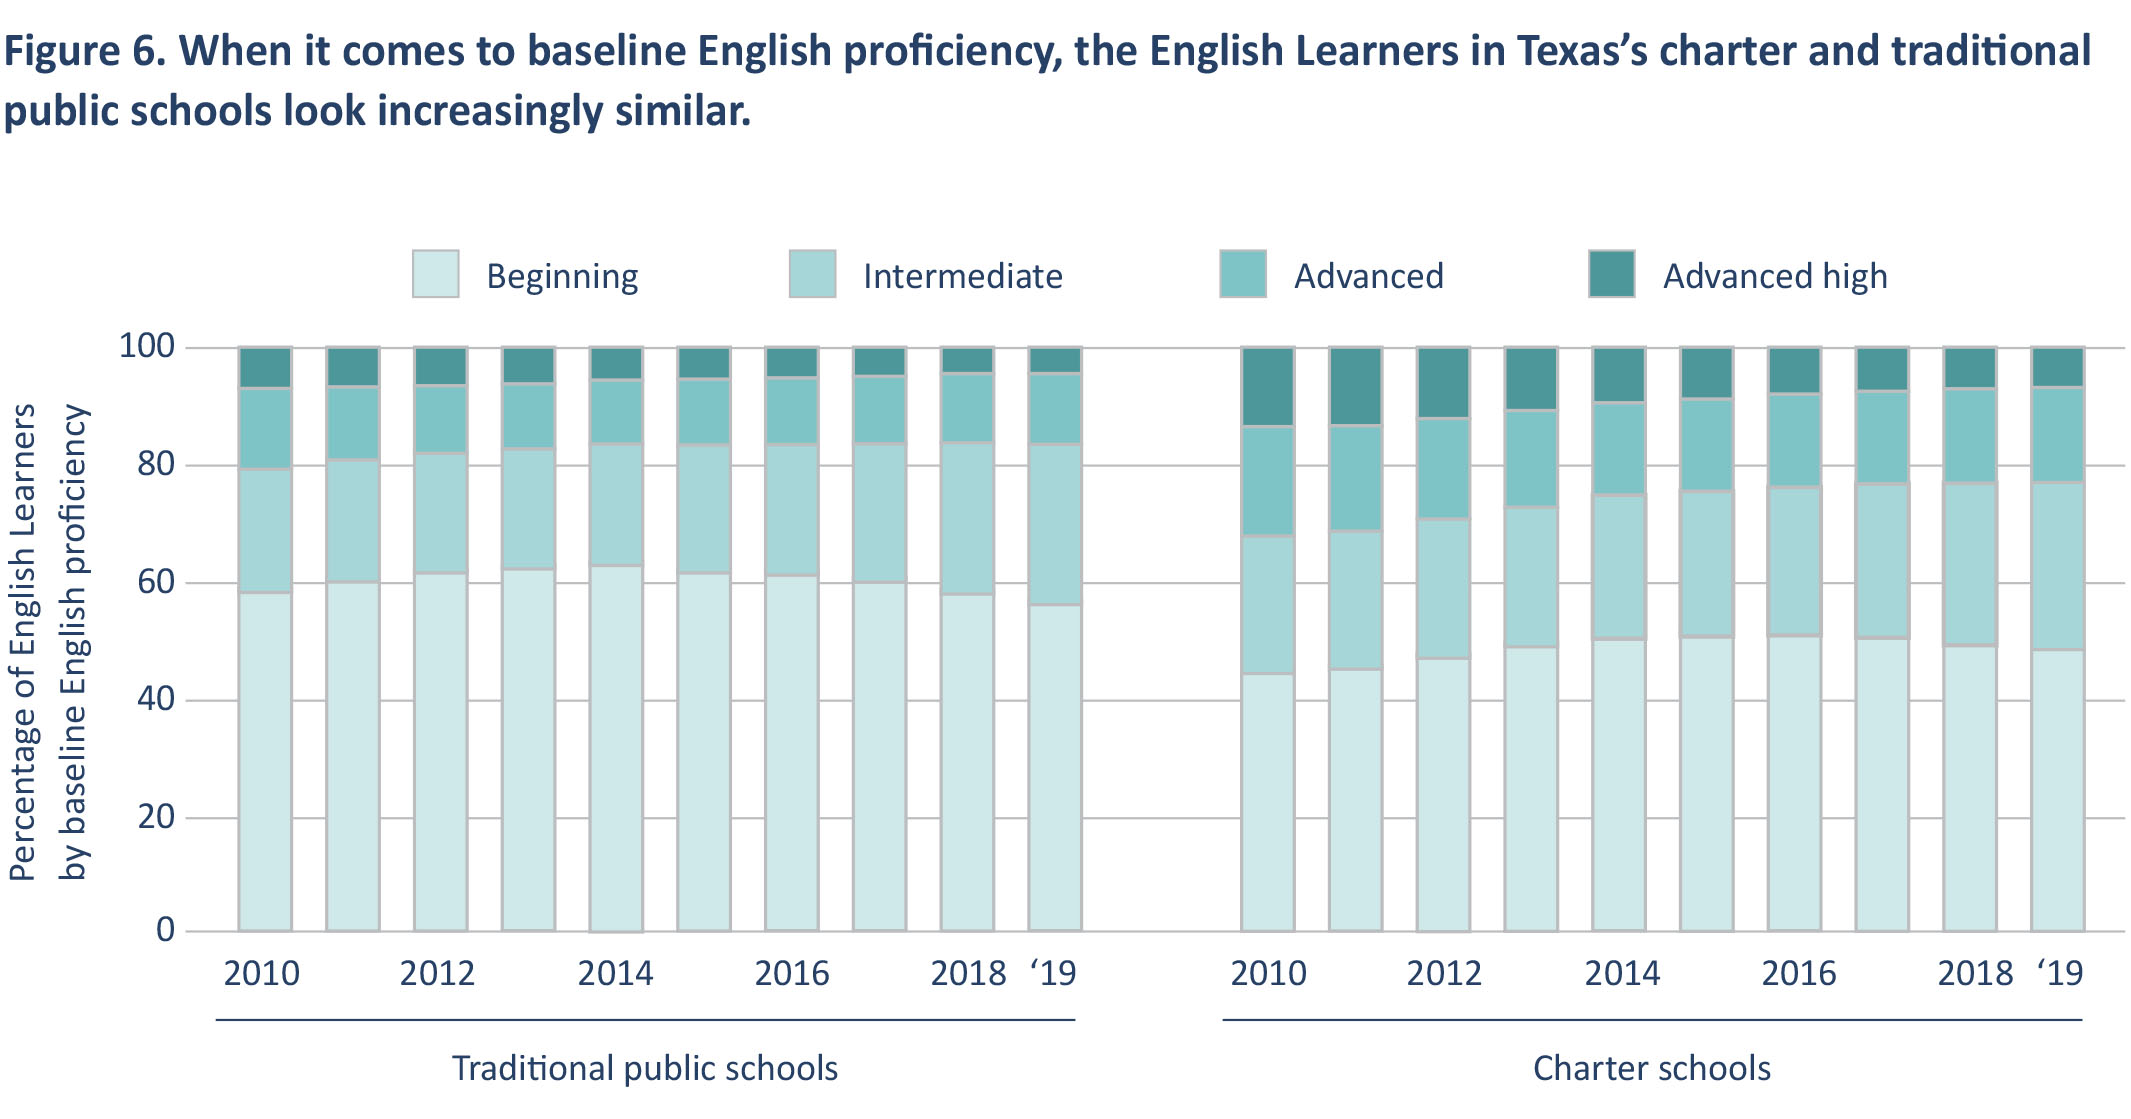 Figure 6. When it comes to baseline English proficiency, the English Learners in Texas's charter and traditional public schools look increasingly similar.